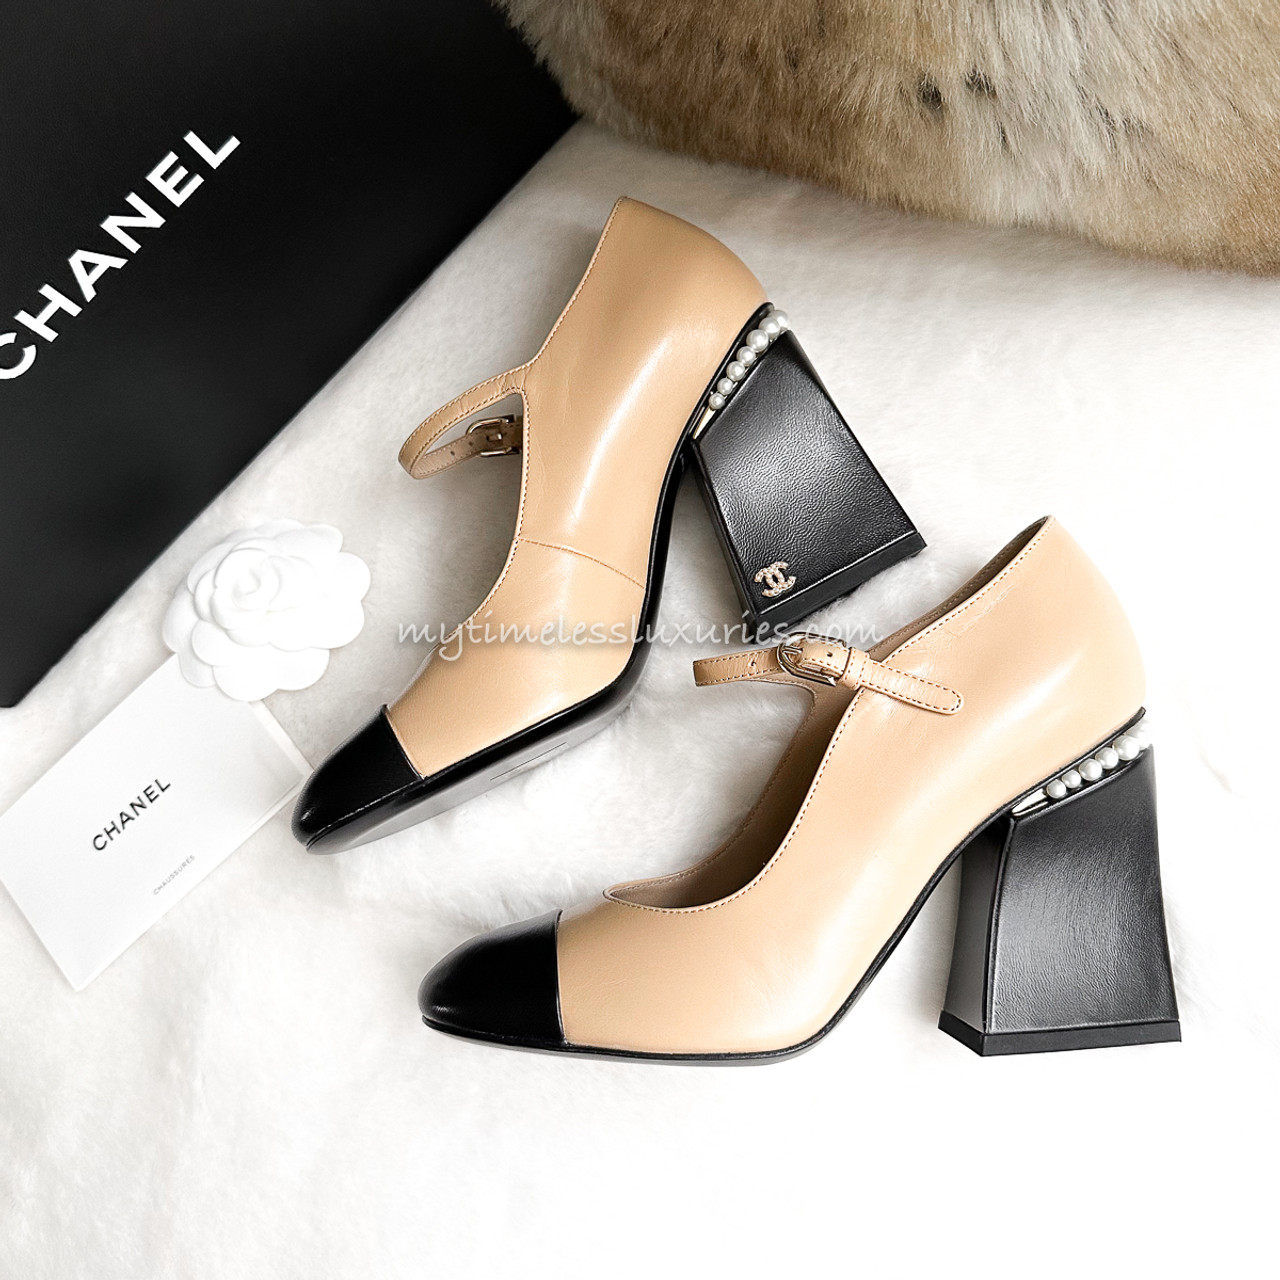 Chanel Beige/Black Leather Pearl Embellished Mules Size 37 at